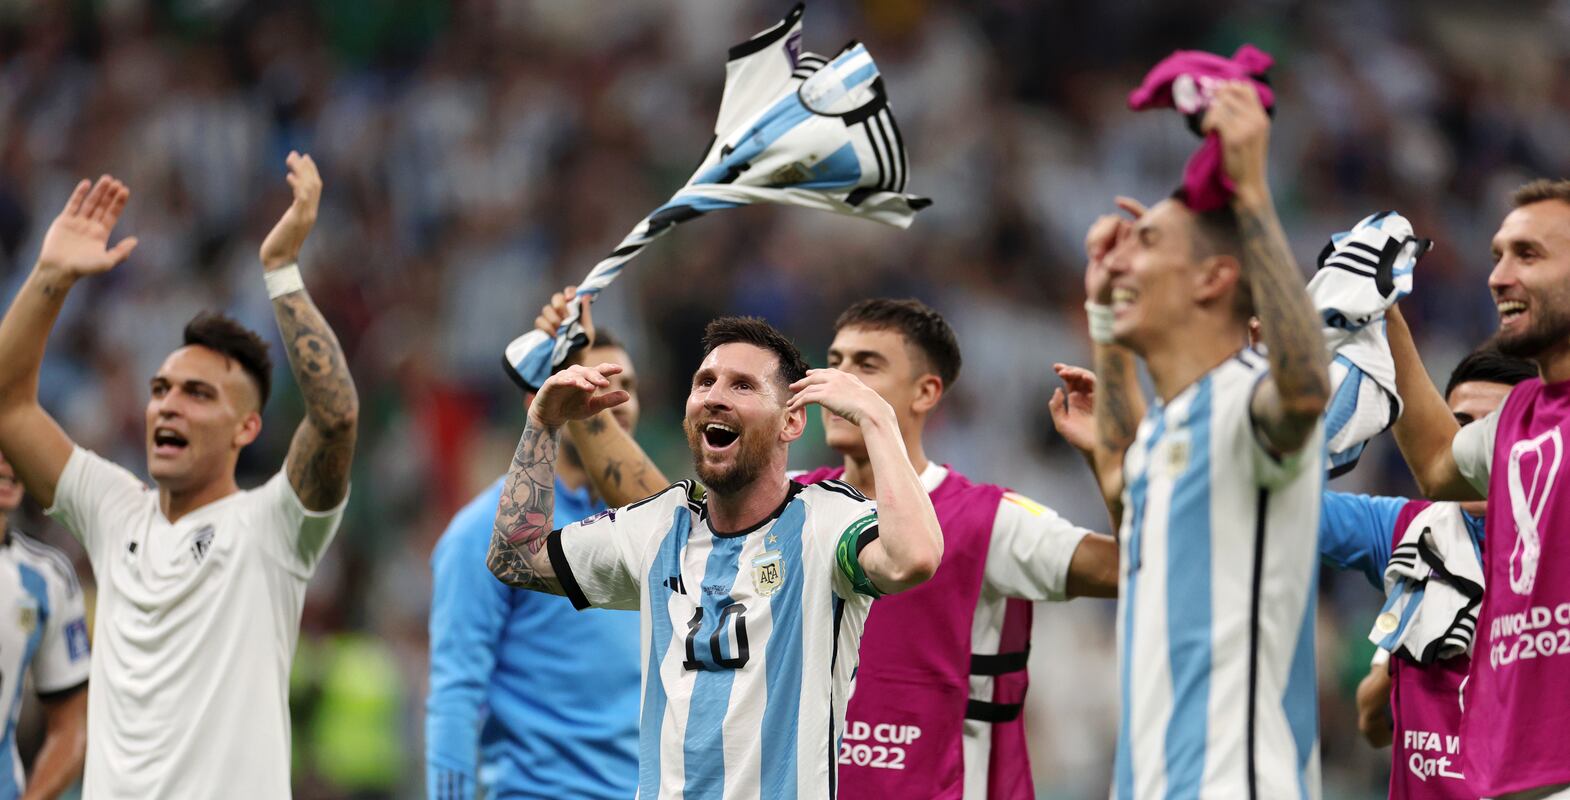 LUSAIL CITY, QATAR - NOVEMBER 26: Lionel Messi and Argentina applaud fans after the 2-0 victory in the FIFA World Cup Qatar 2022 Group C match between Argentina and Mexico at Lusail Stadium on November 26, 2022 in Lusail City, Qatar. (Photo by Dean Mouhtaropoulos / Getty Images)